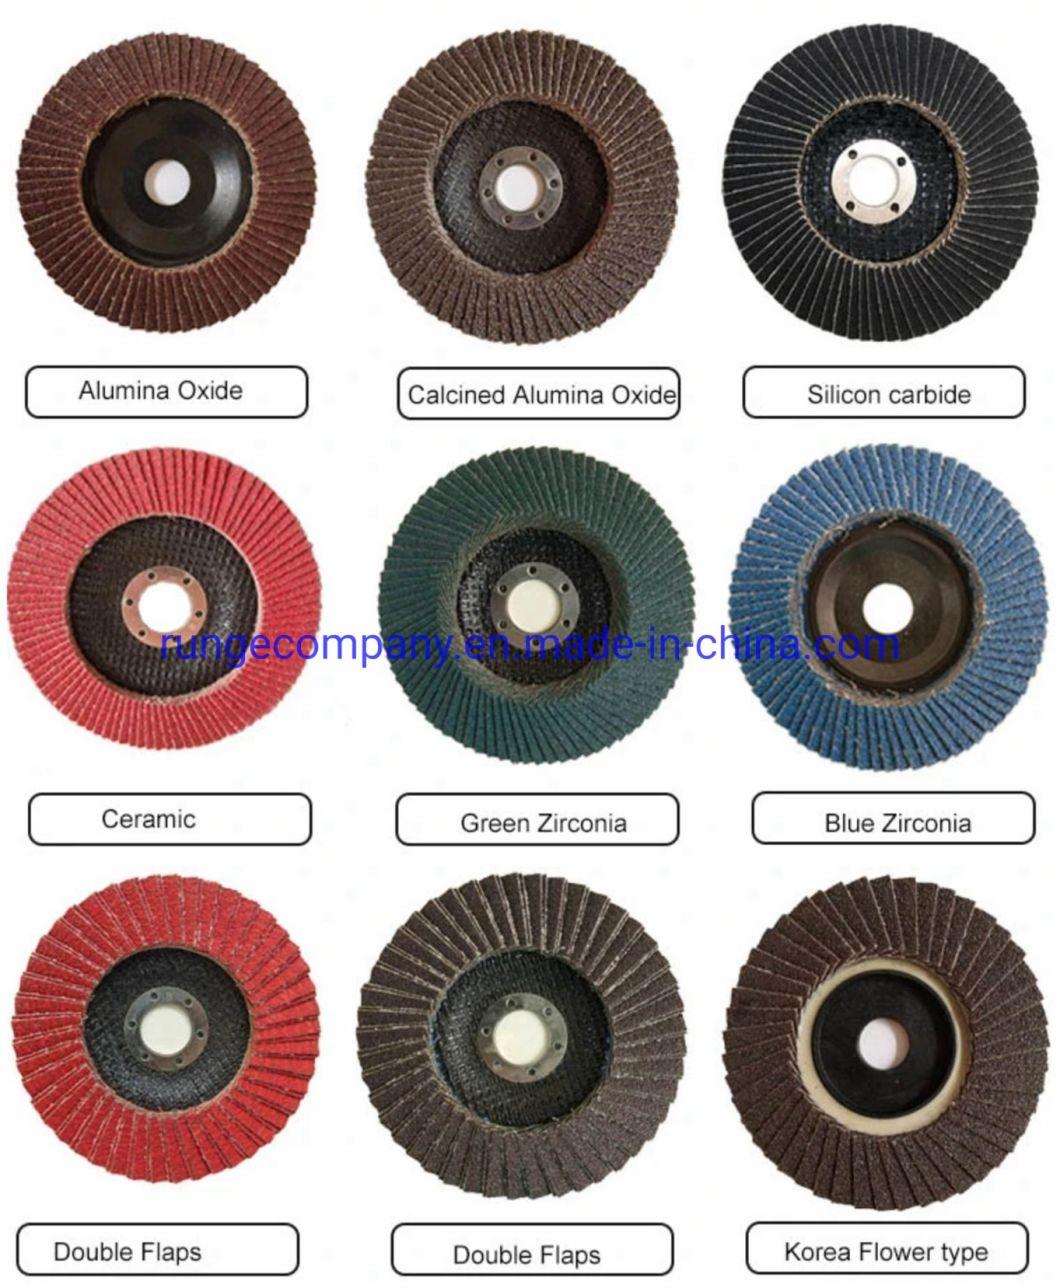 Power Tool Cutting Disc Europe Quality 7" Inch 180mm Abrasive Aluminum Oxide Cutting Wheels for Metal Stainless Steel Inox